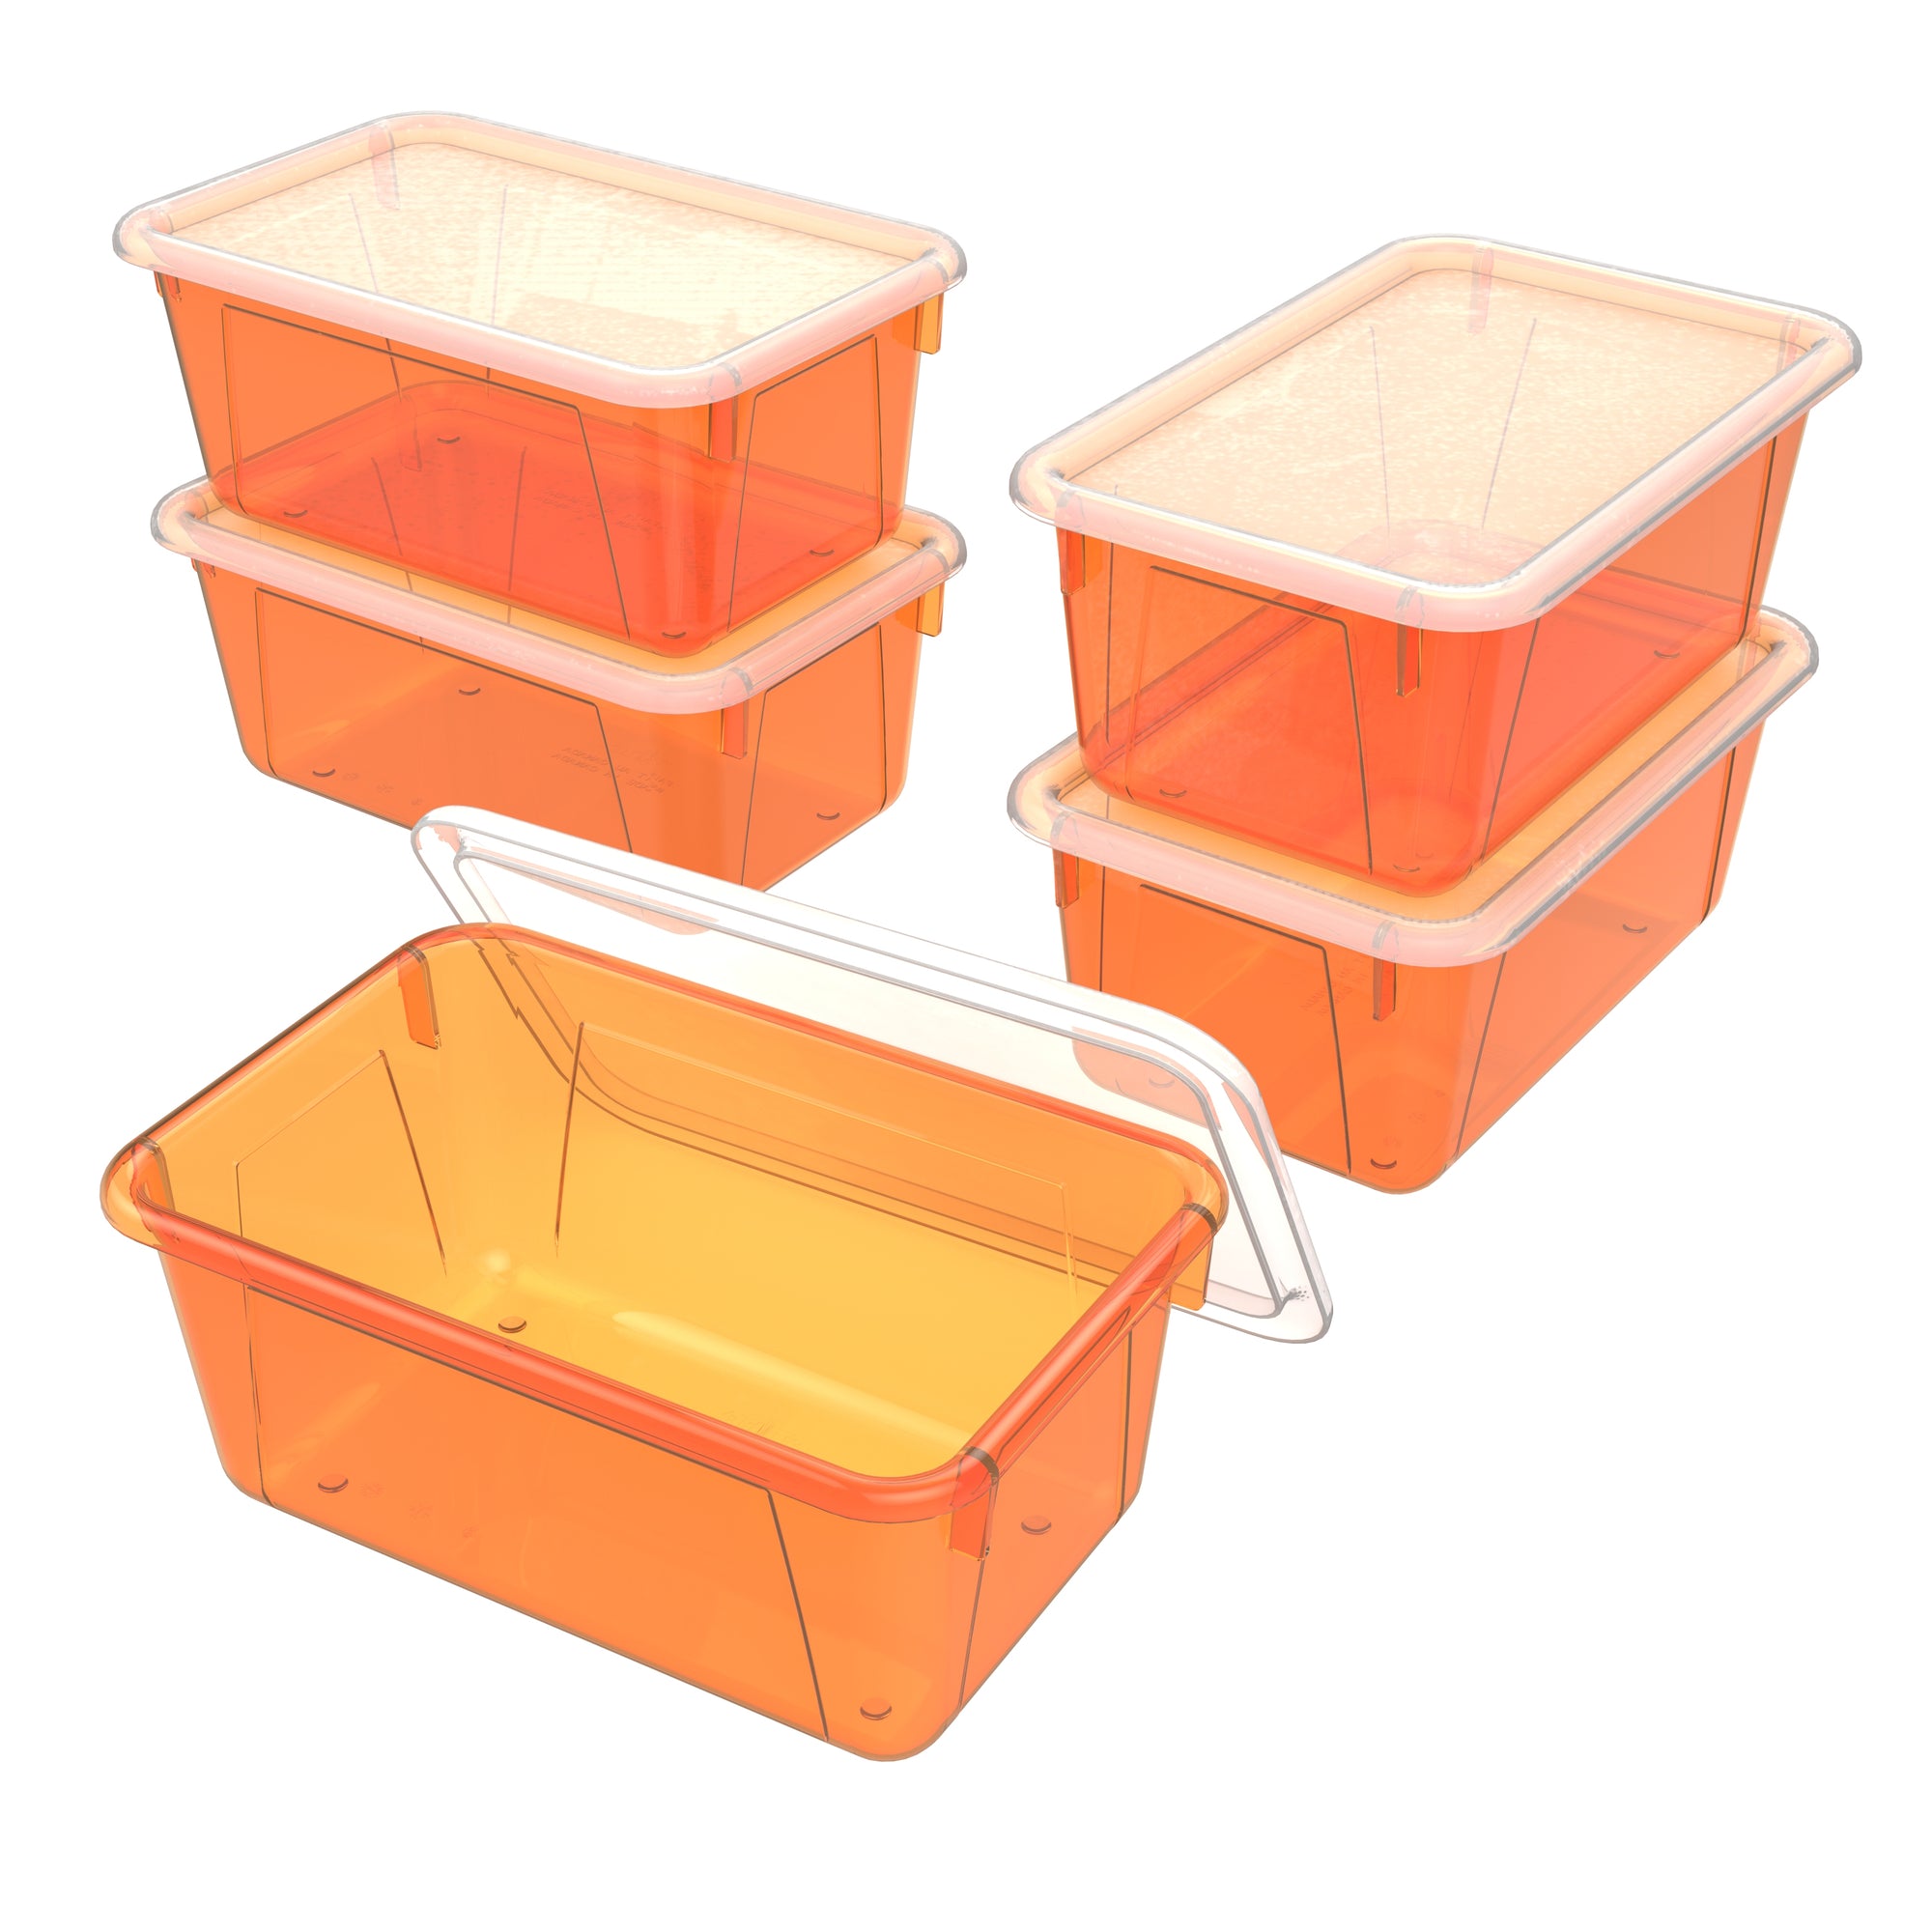 Storex Small Cubby Bin with Cover, Tint Orange, 5-Pack